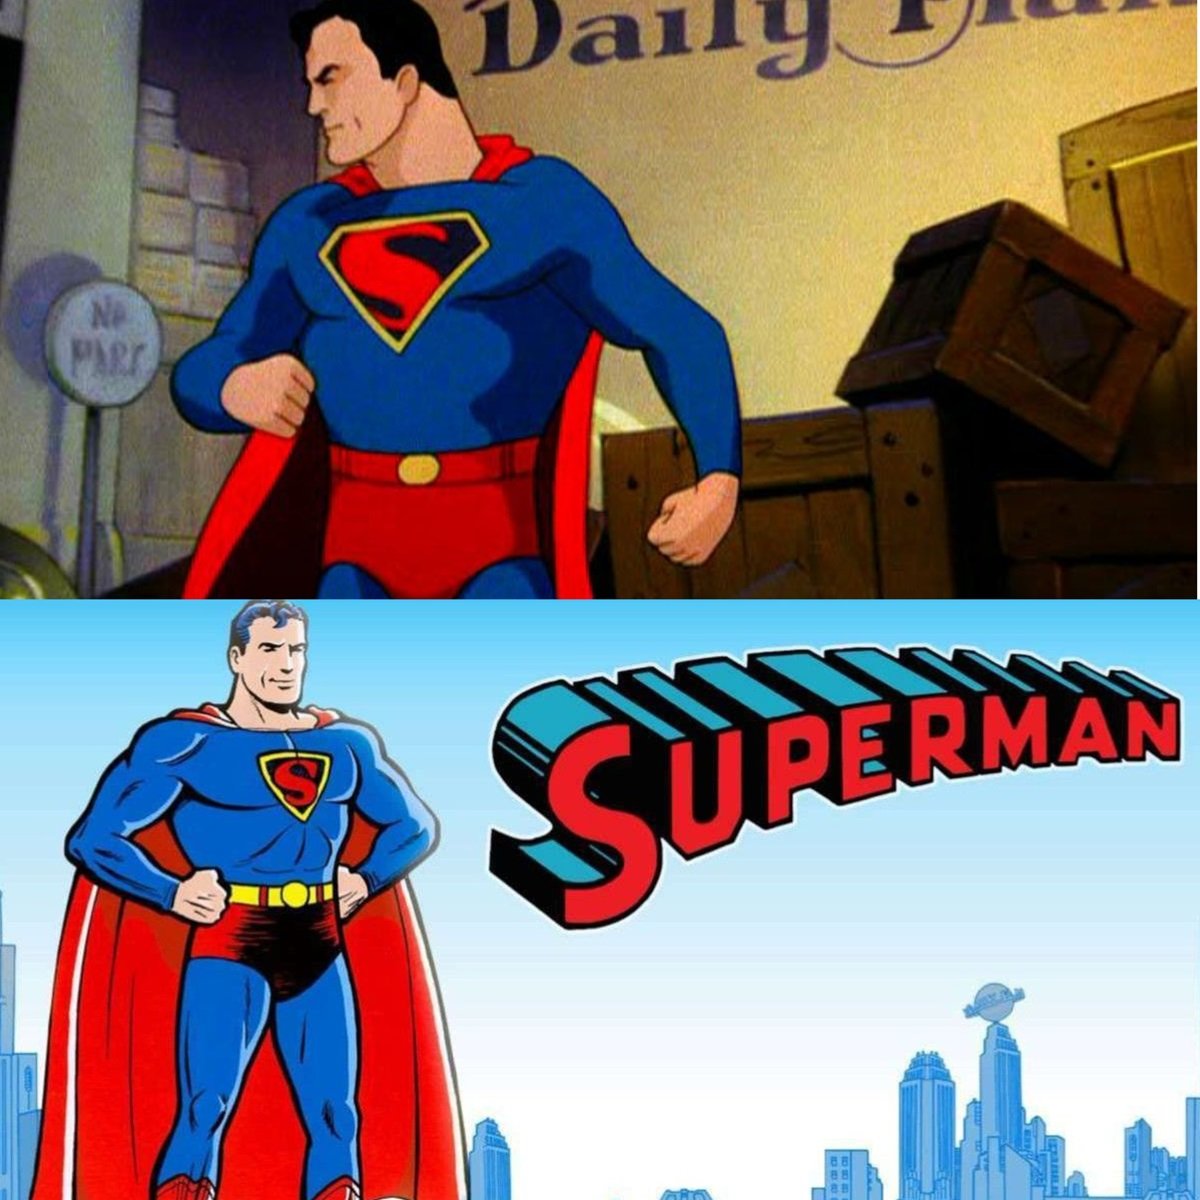 the Golden Age Superman, as seen in the animated Fleishcher shorts of 1941, and in the pages of Action Comics.